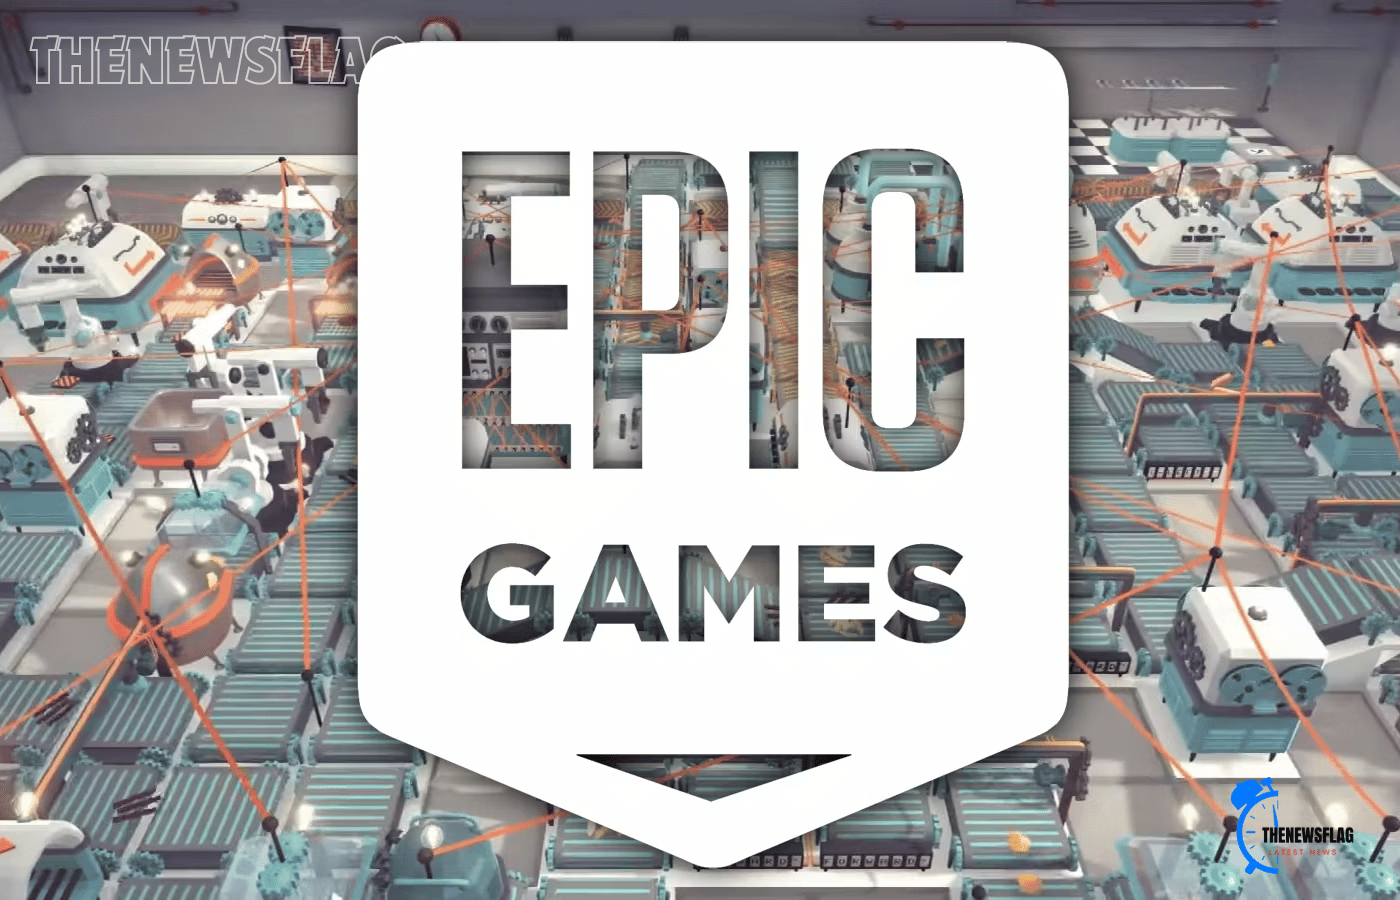 'Consistent' with the PC marketplace, the Epic Games Store will be available on iOS and Android.